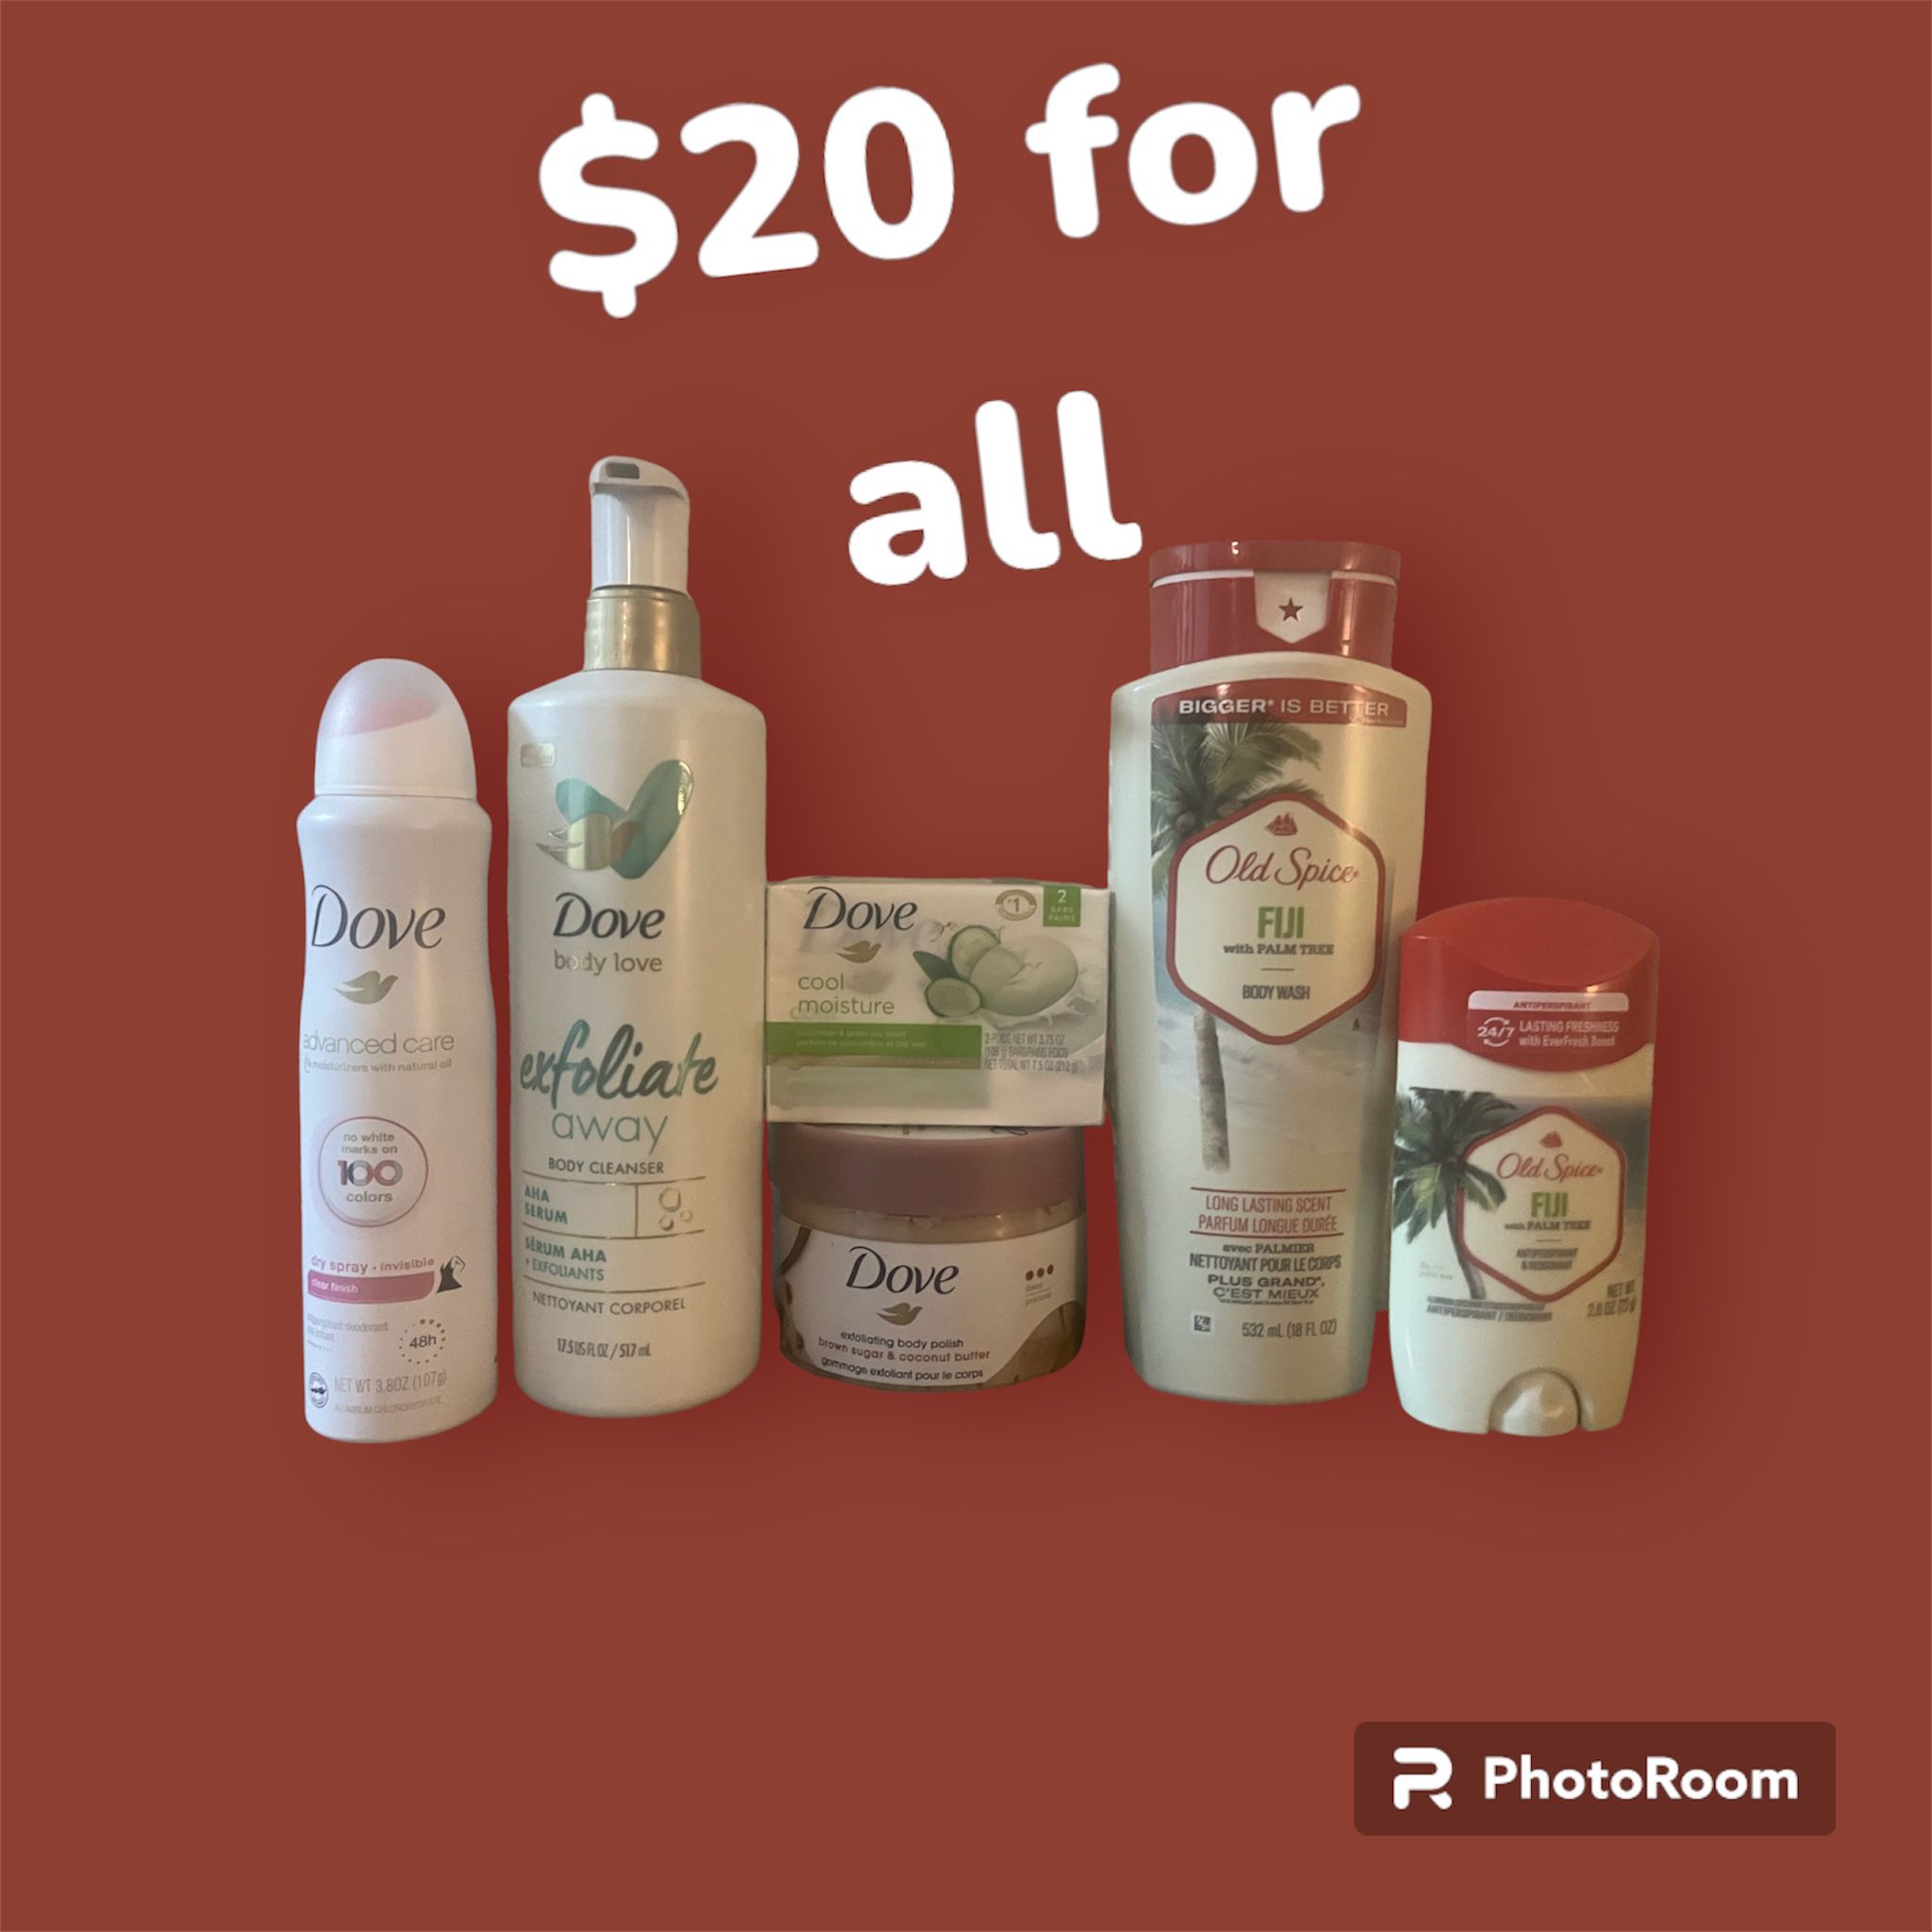 DISCOUNTED Dove & Old Spice Bundle